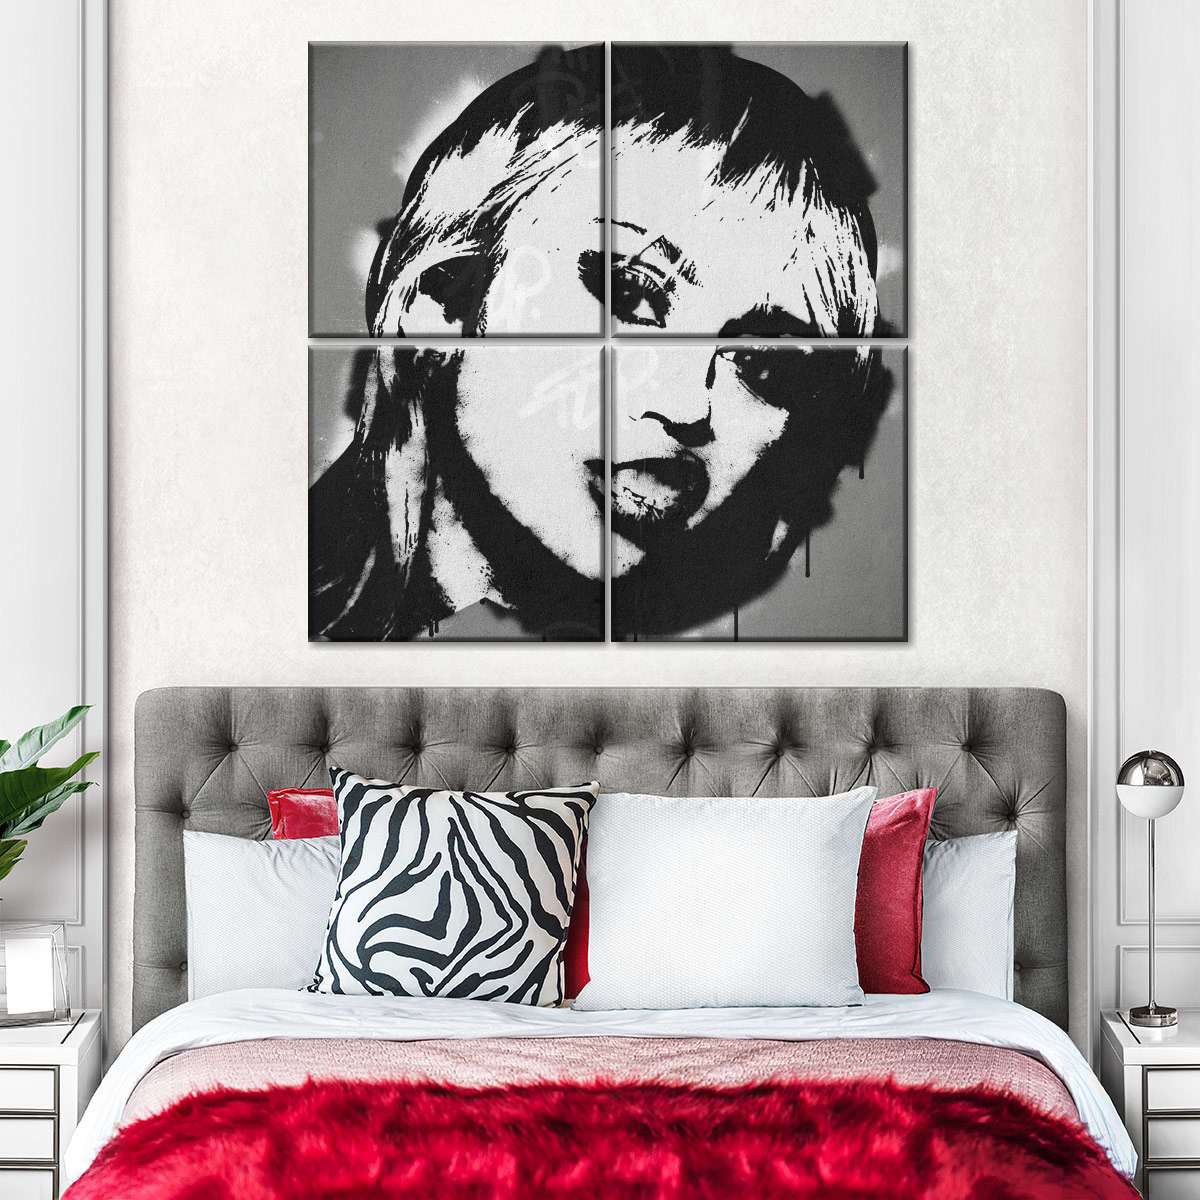 Miley Cyrus Pop Music Star Banksy Style Art: Canvas Prints, Frames & Posters